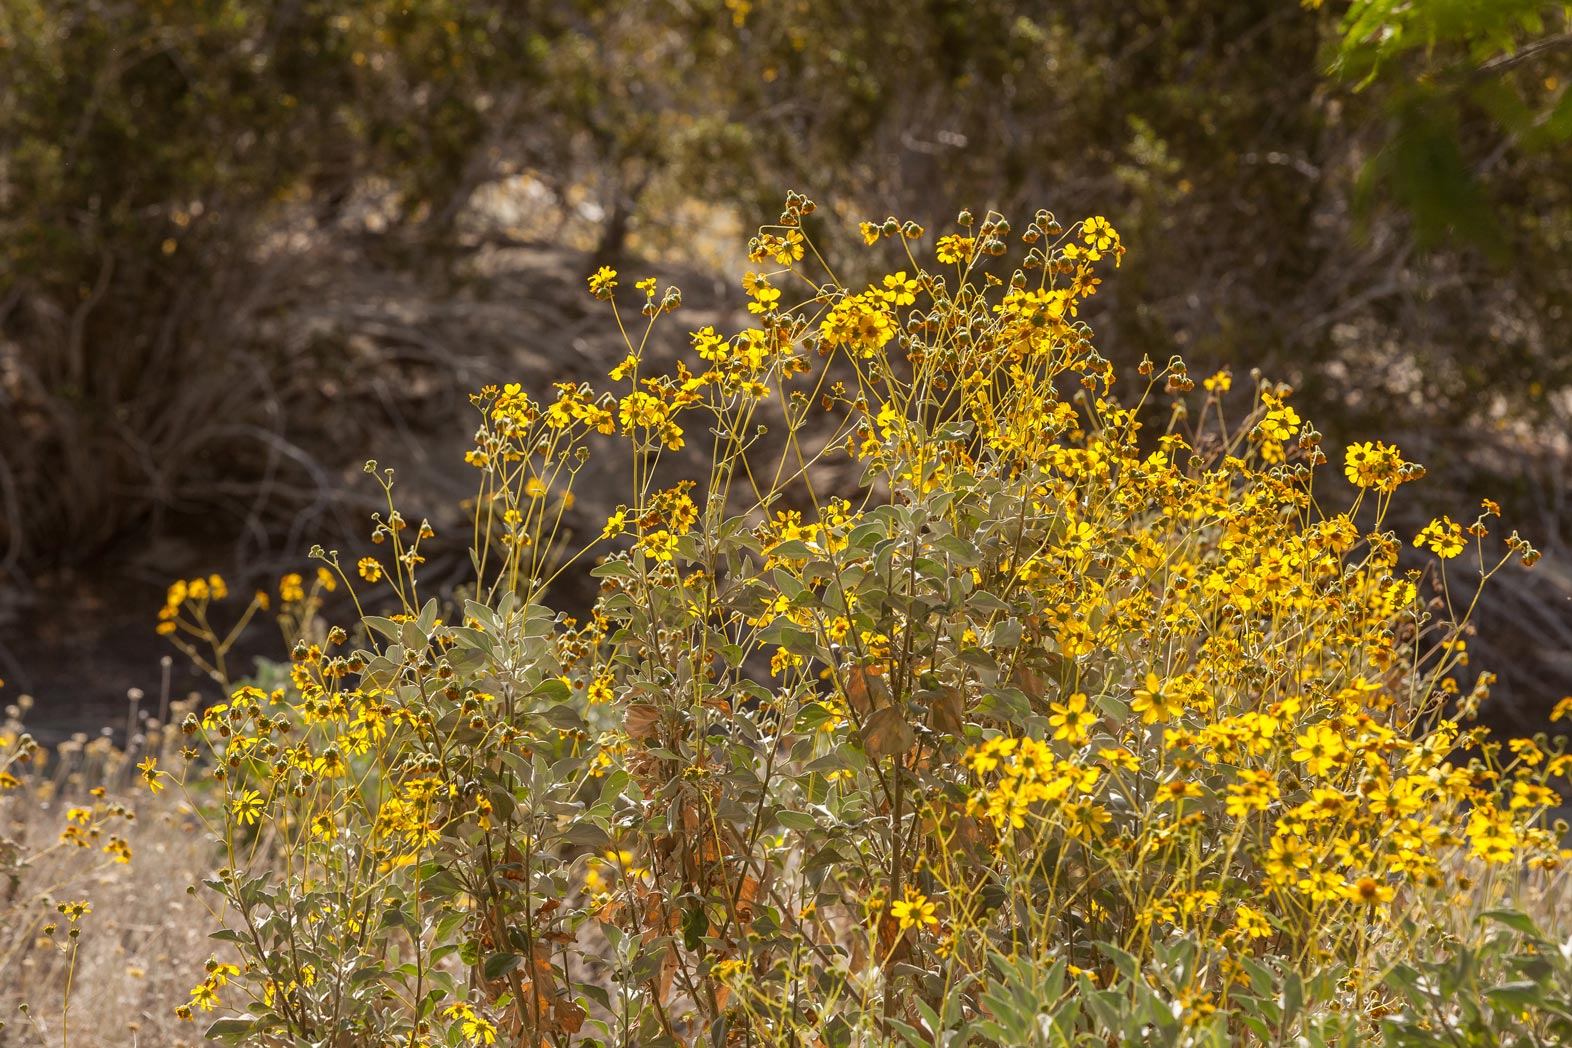 A Brittlebush with yellow blooms in the Wildflower Field at Sunnylands Center & Gardens.